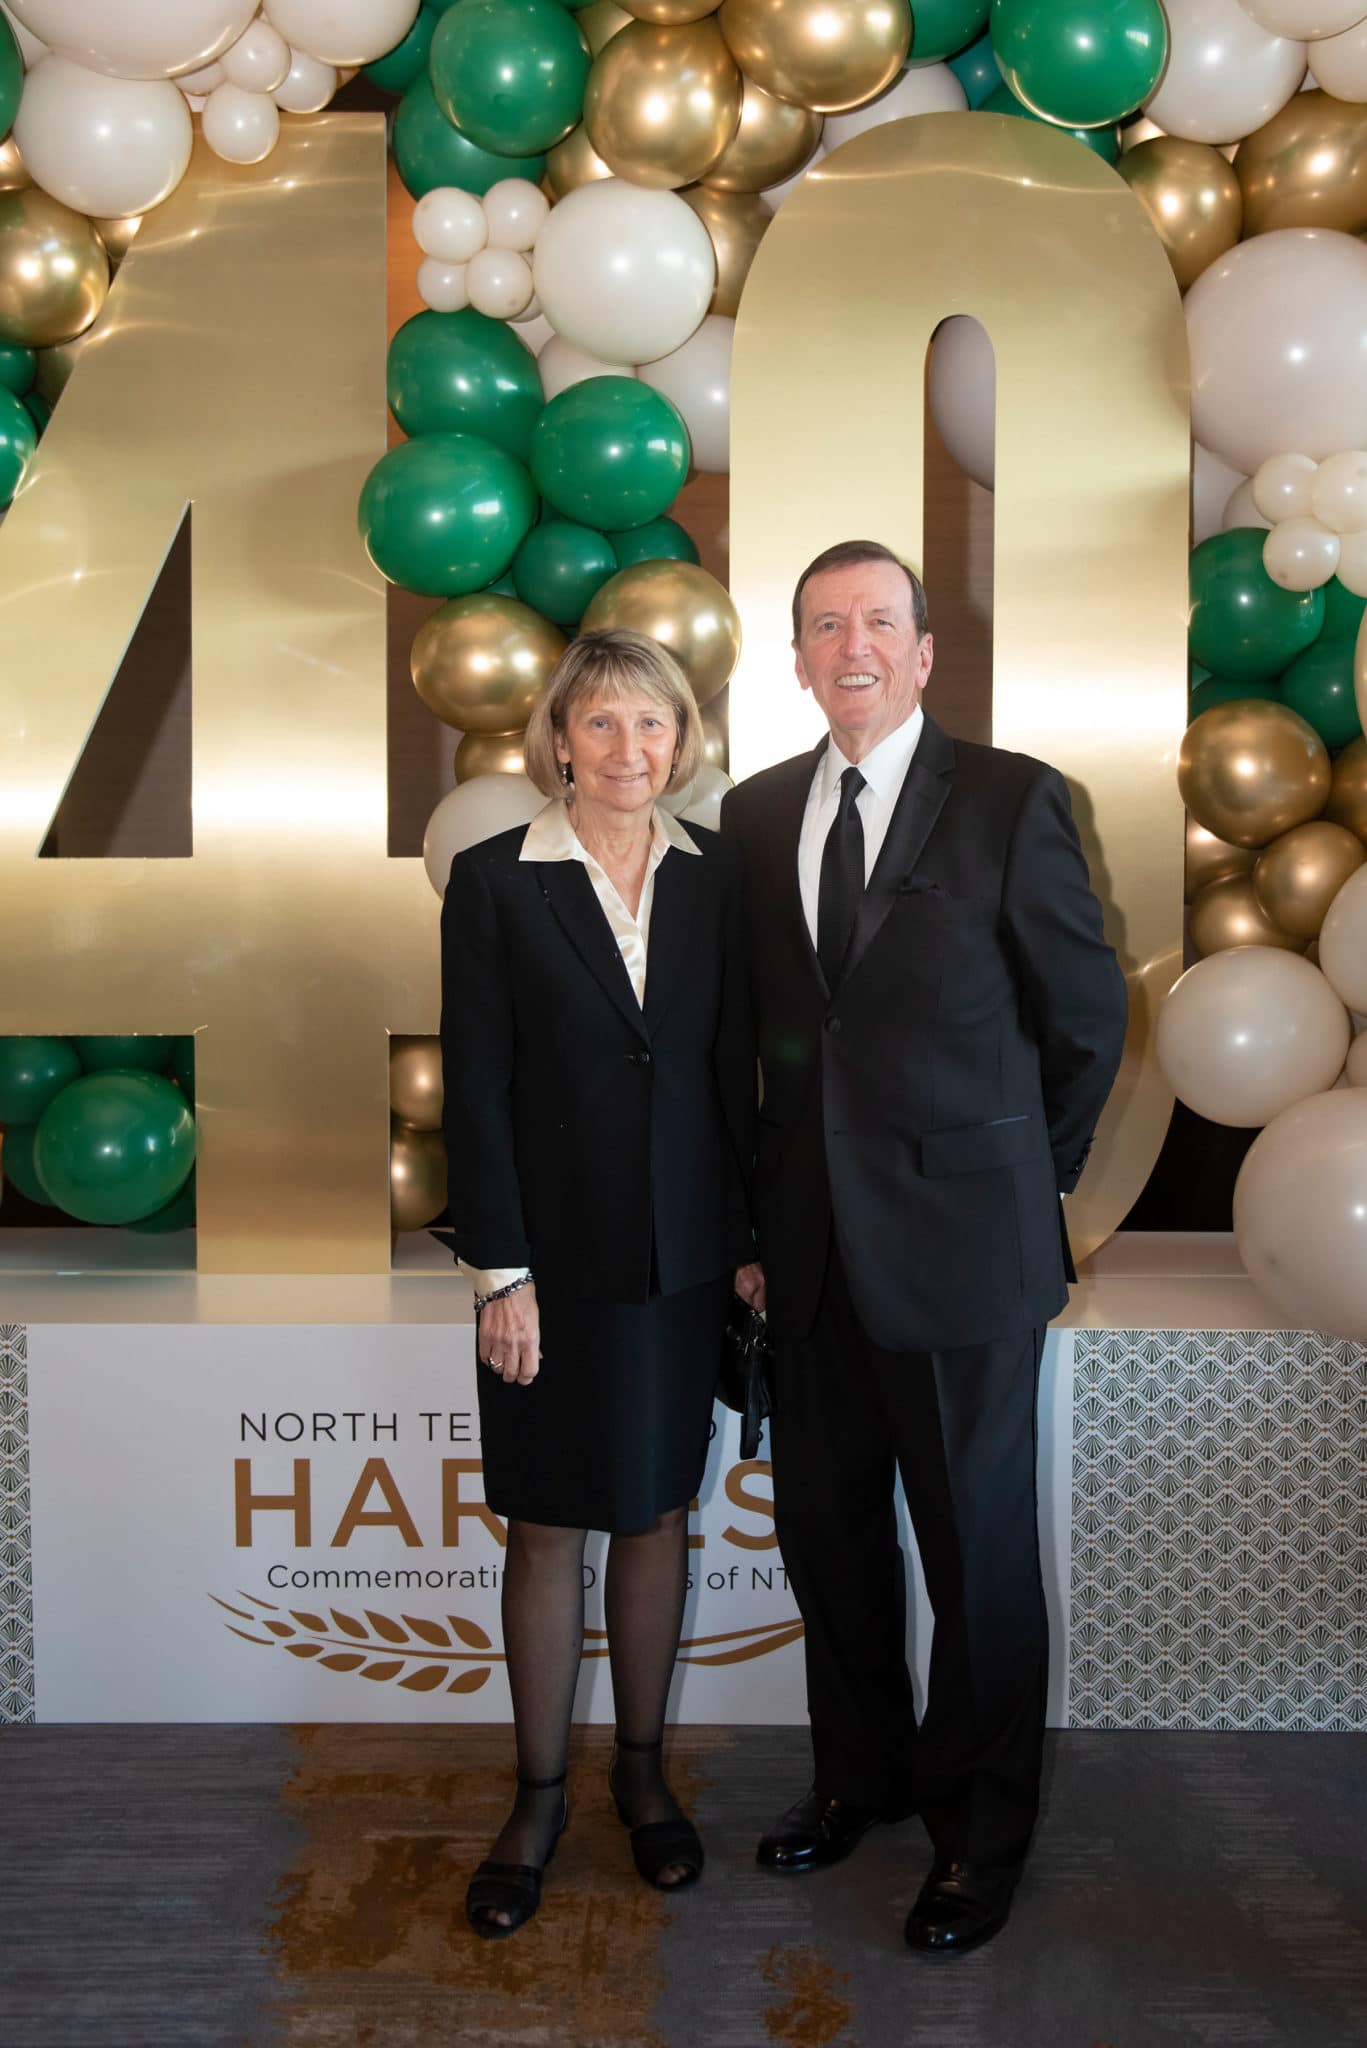 Ray Hemmig and his wife at the North Texas Food Bank's Harvest event Celebrating NTFB's 40th Anniversary